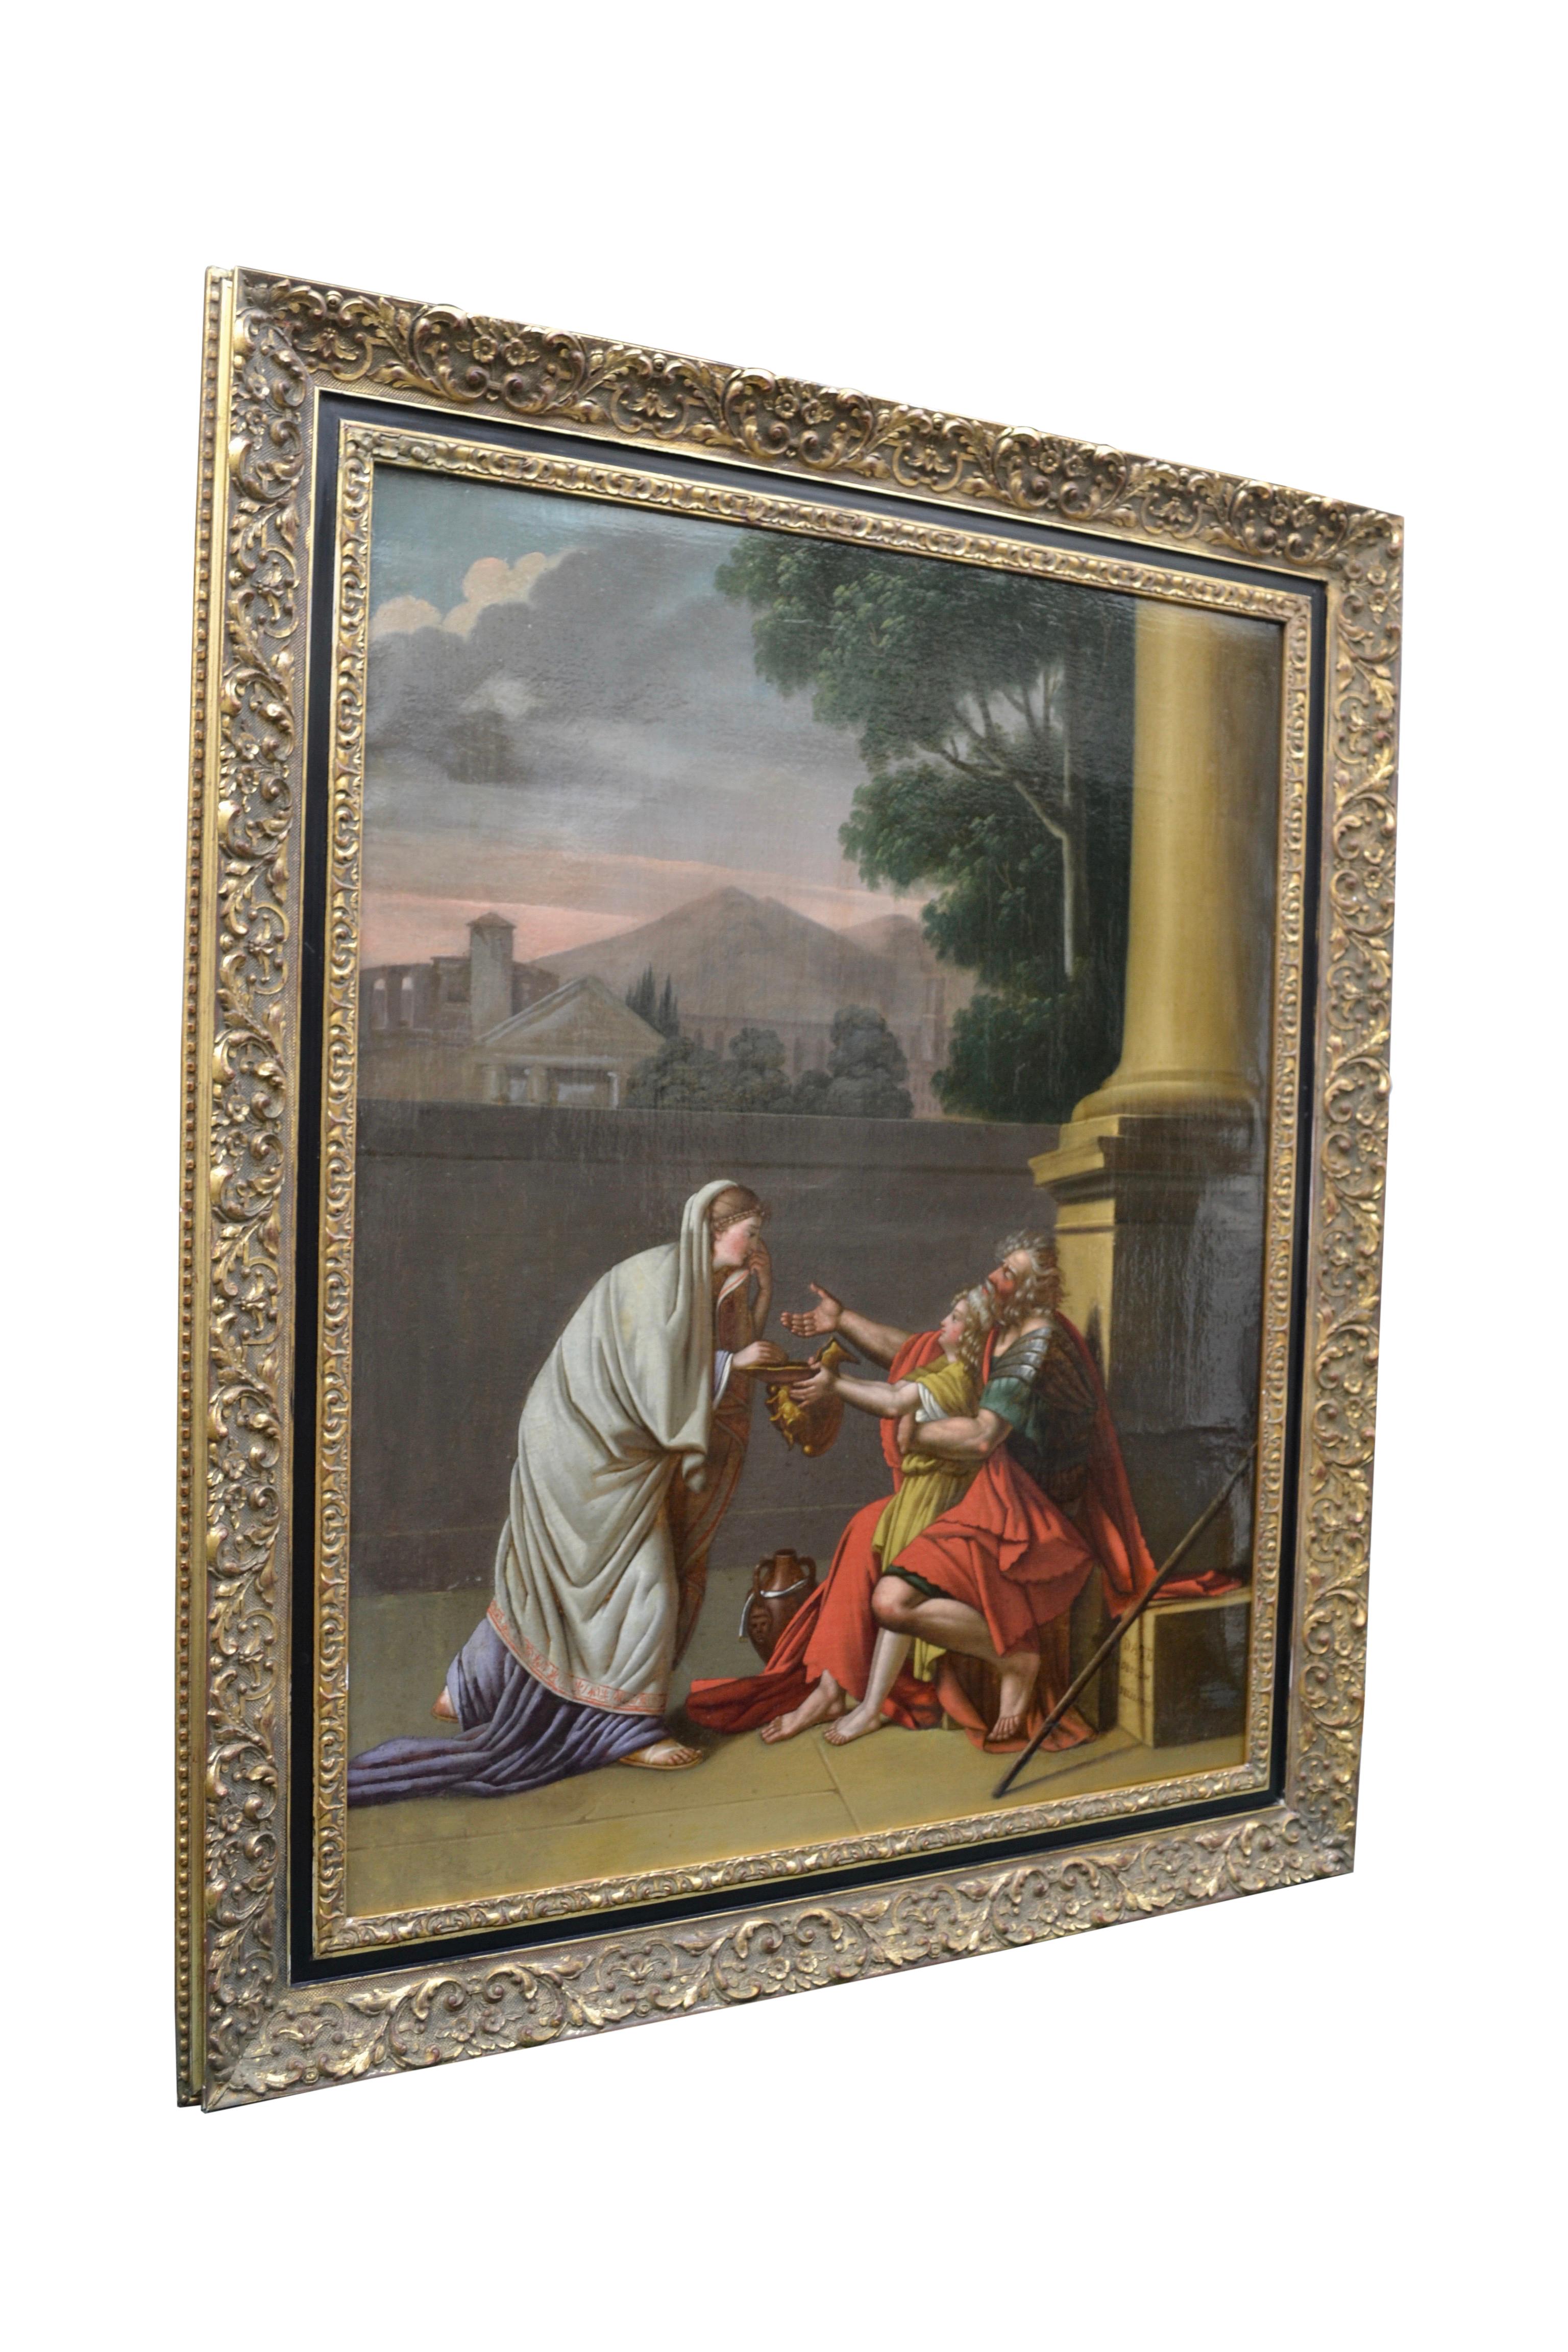 A neo-classical mid-19 century oil on canvas painting after an original 1781 painting by J.L David titled 